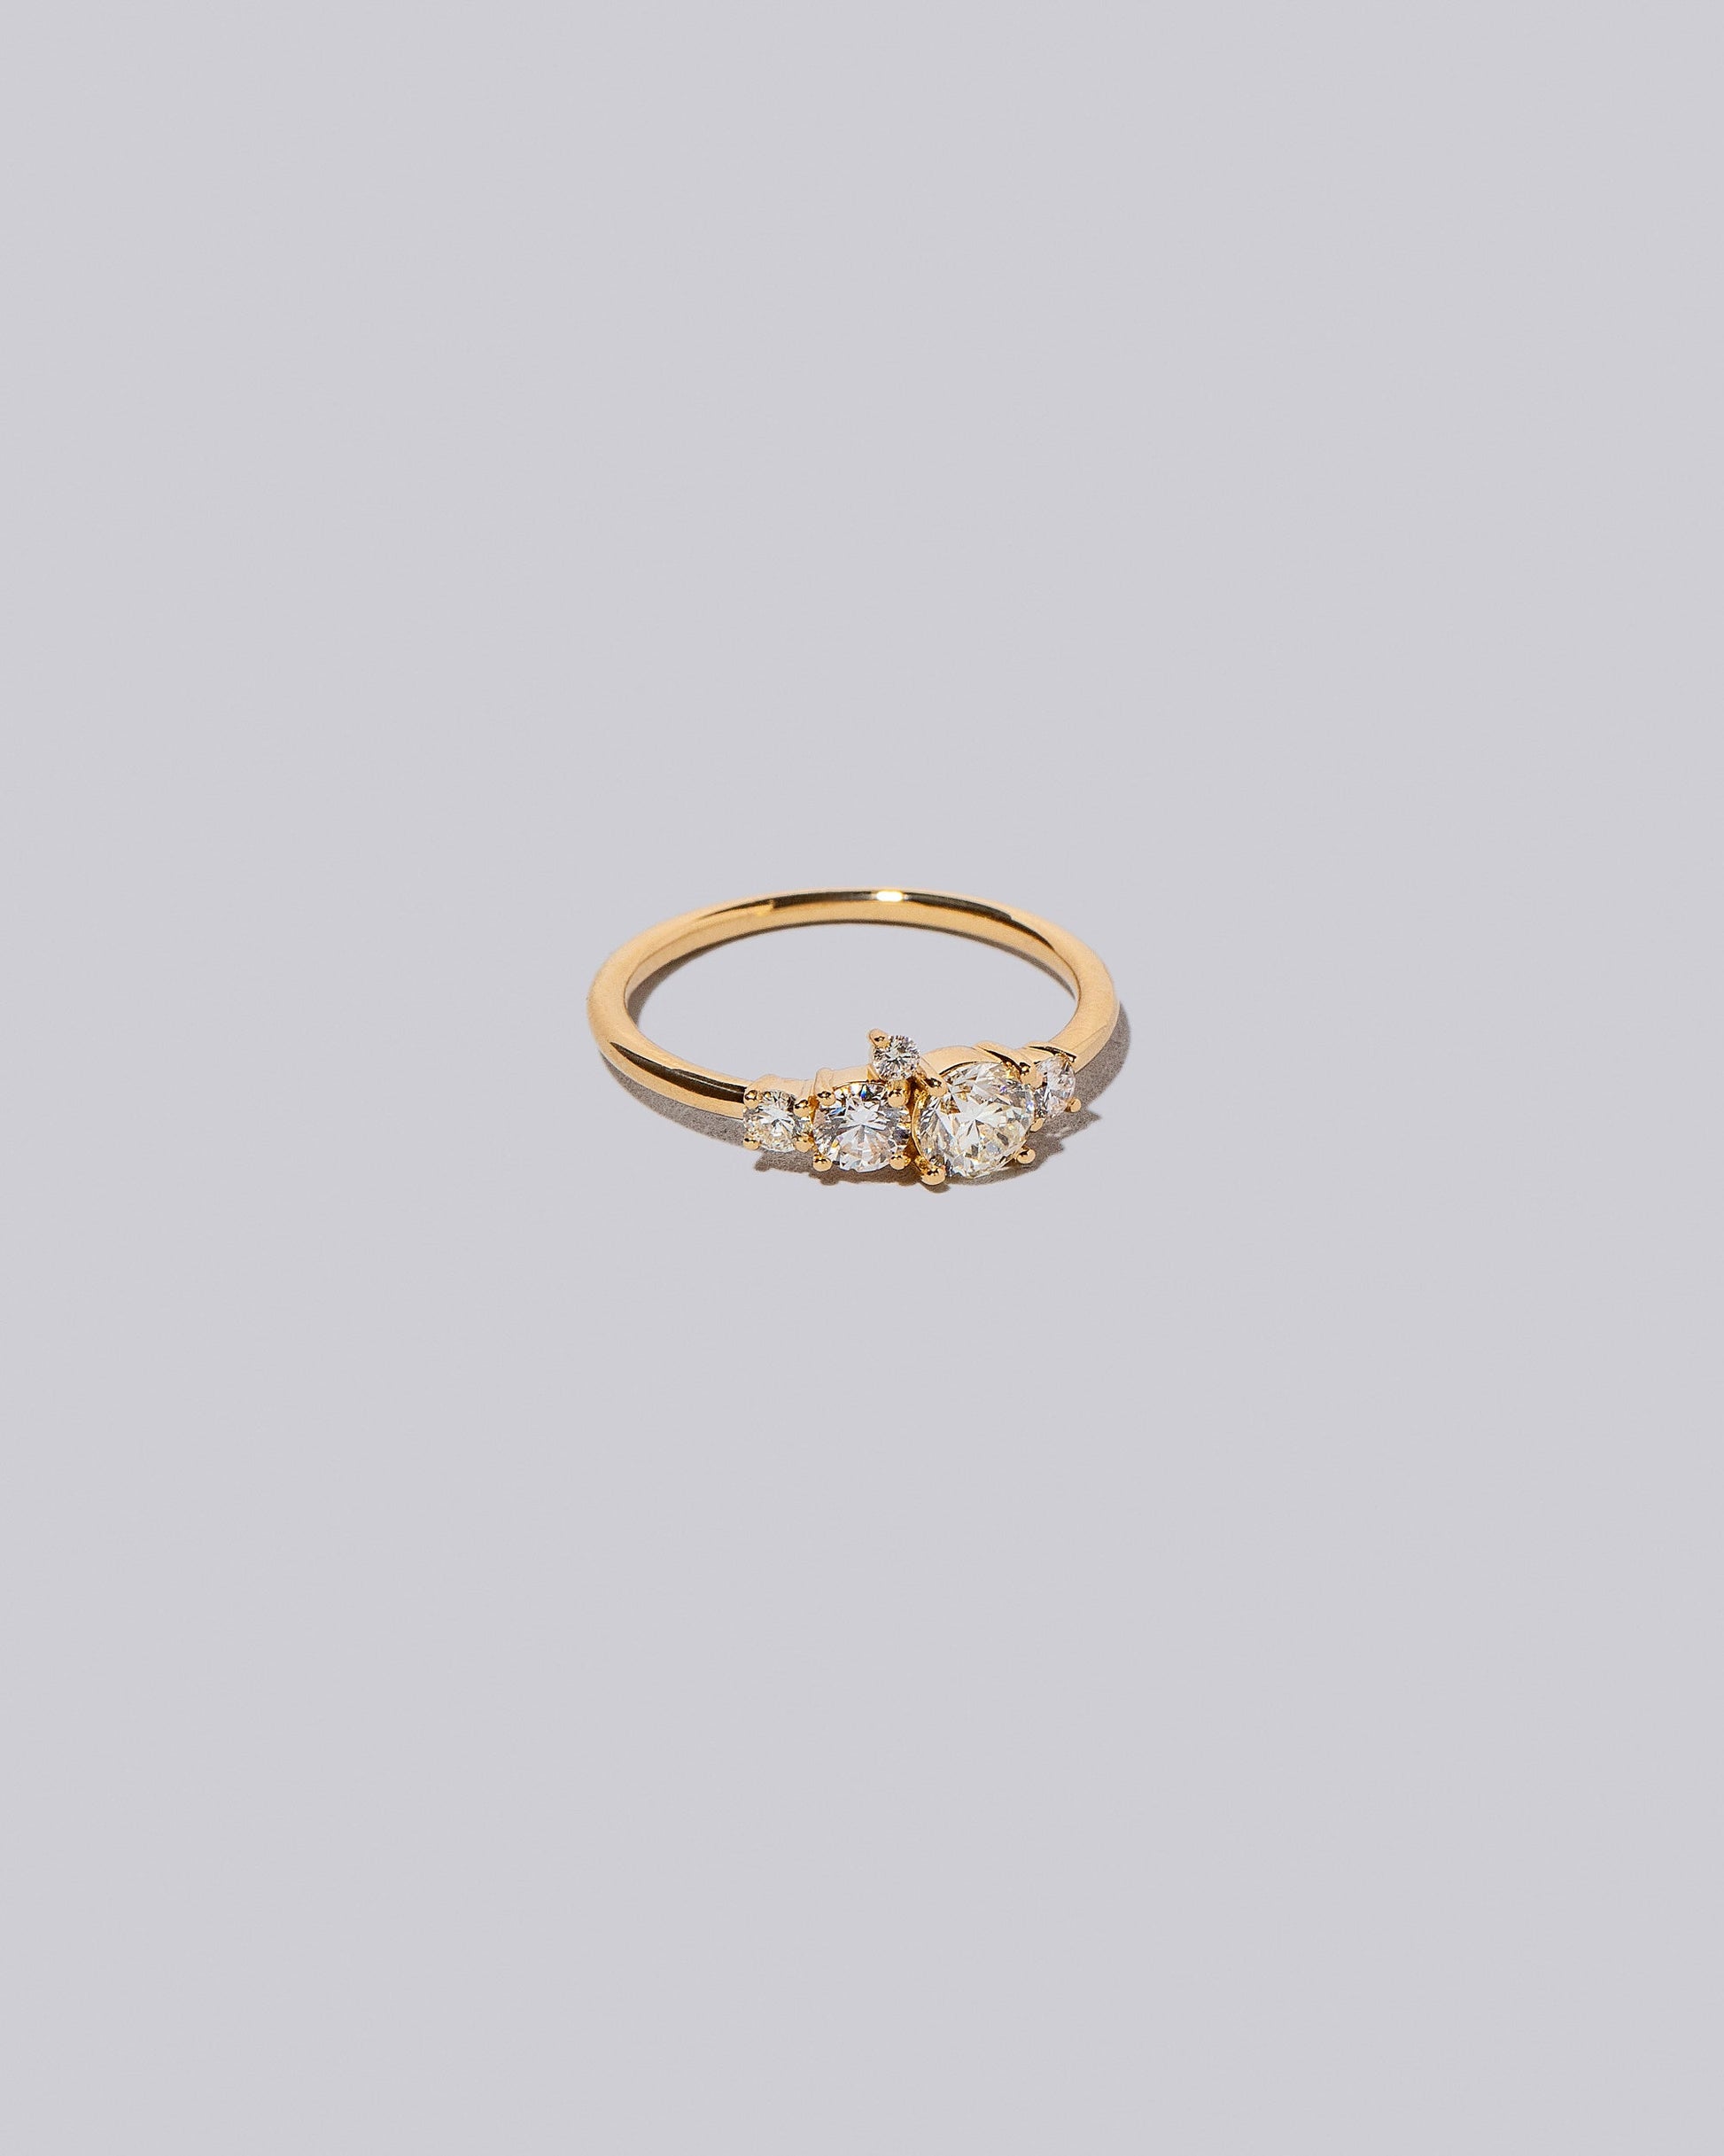  Aster Ring - White Diamonds on light color background.